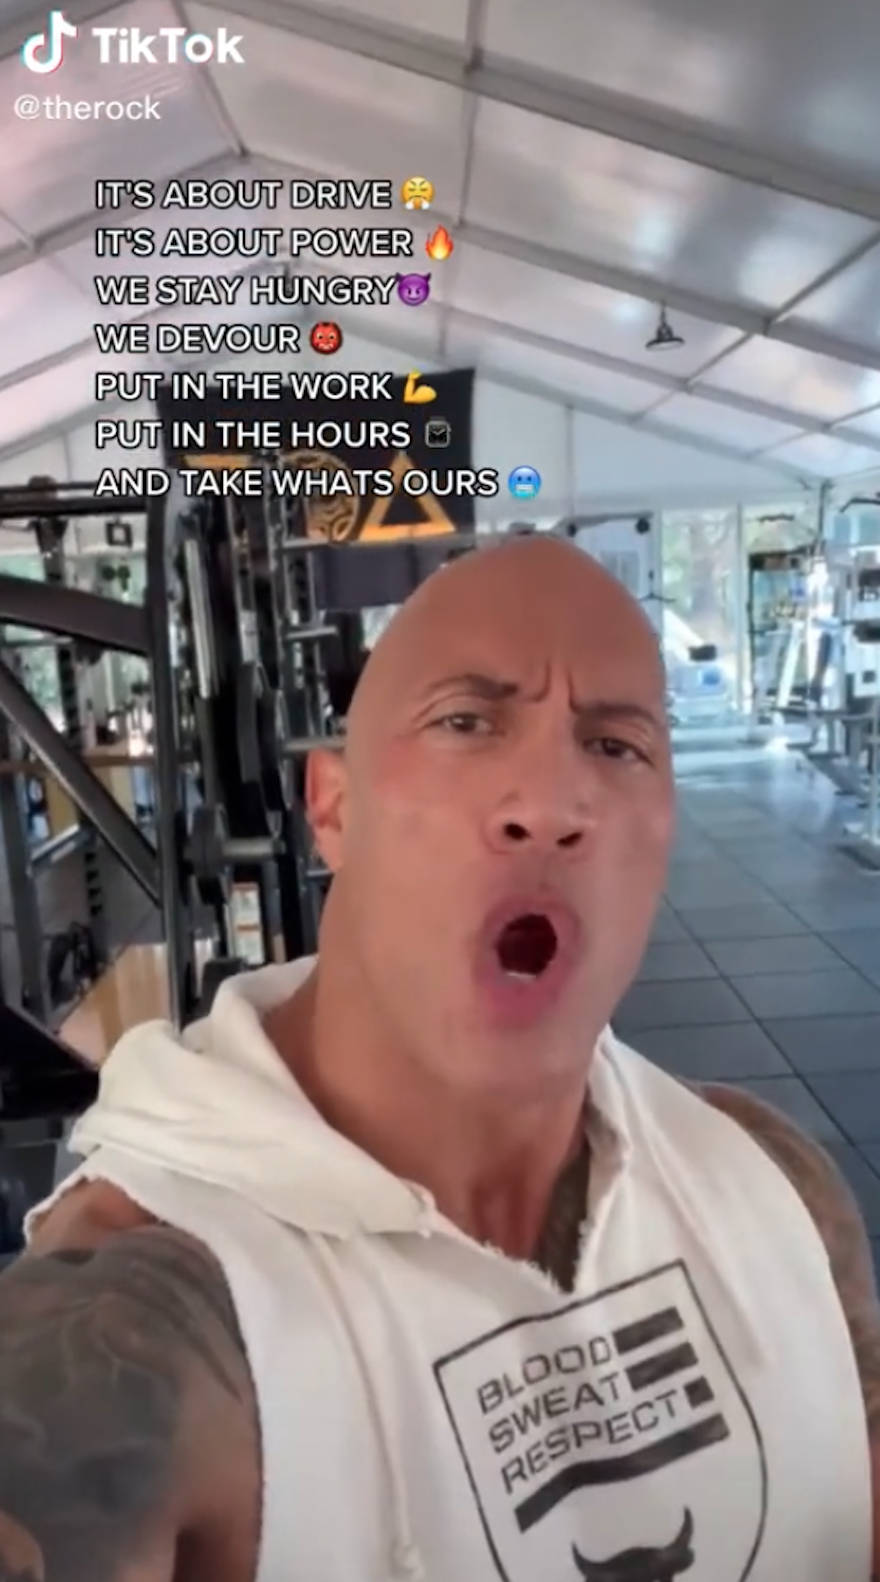 The Rock’s Face Off Verse